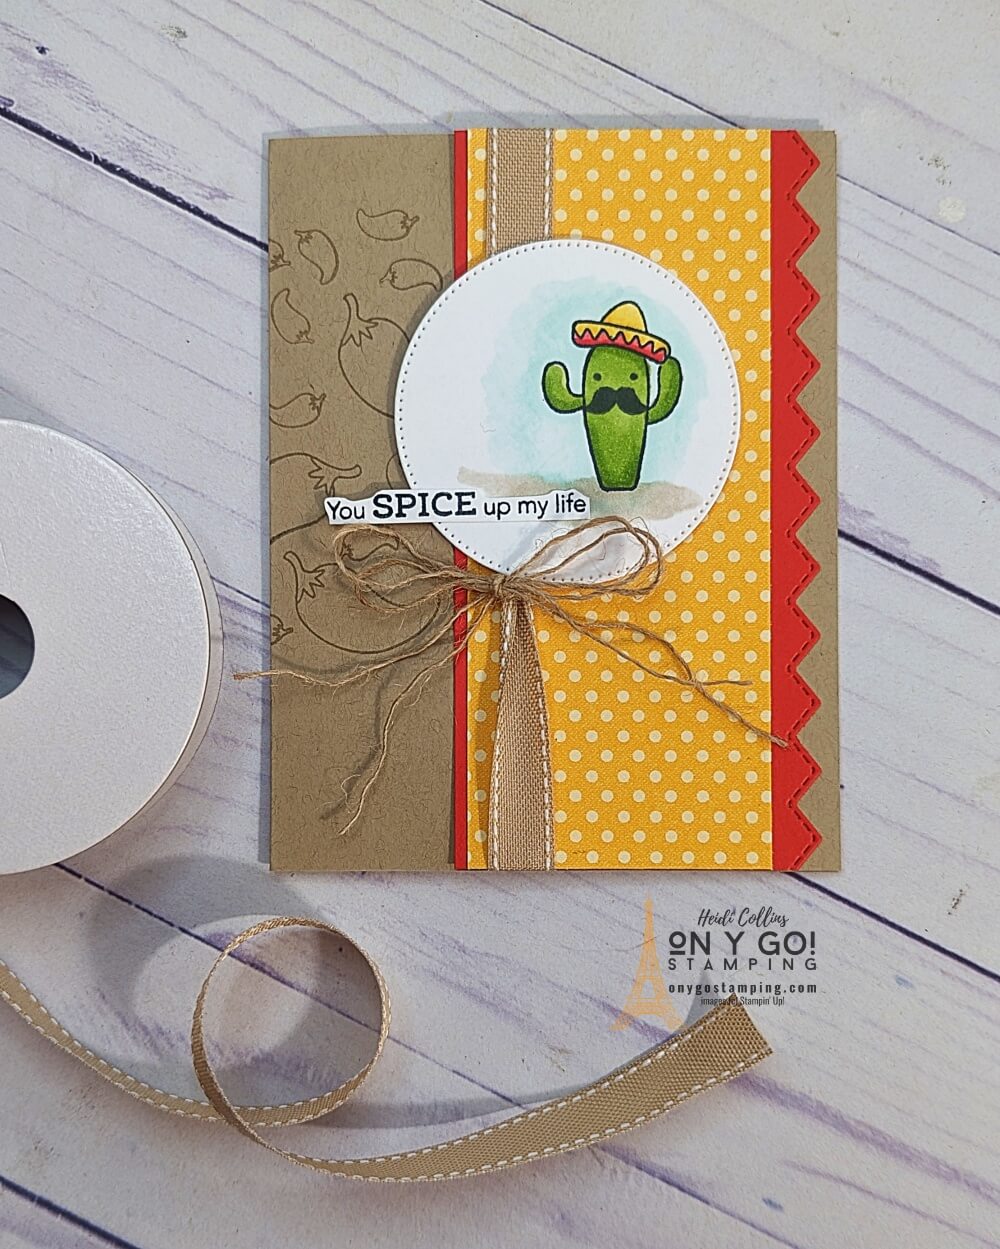 Are you looking for the perfect way to add a unique twist to your Valentine's Day cards? Look no further - the Taco Fiesta stamp set from Stampin' Up! is perfect for creating handmade cards with a touch of fun. Featuring tacos, chili peppers, and even a funky mustache, you'll be sure to have the most memorable handmade Valentine's Day card this year!